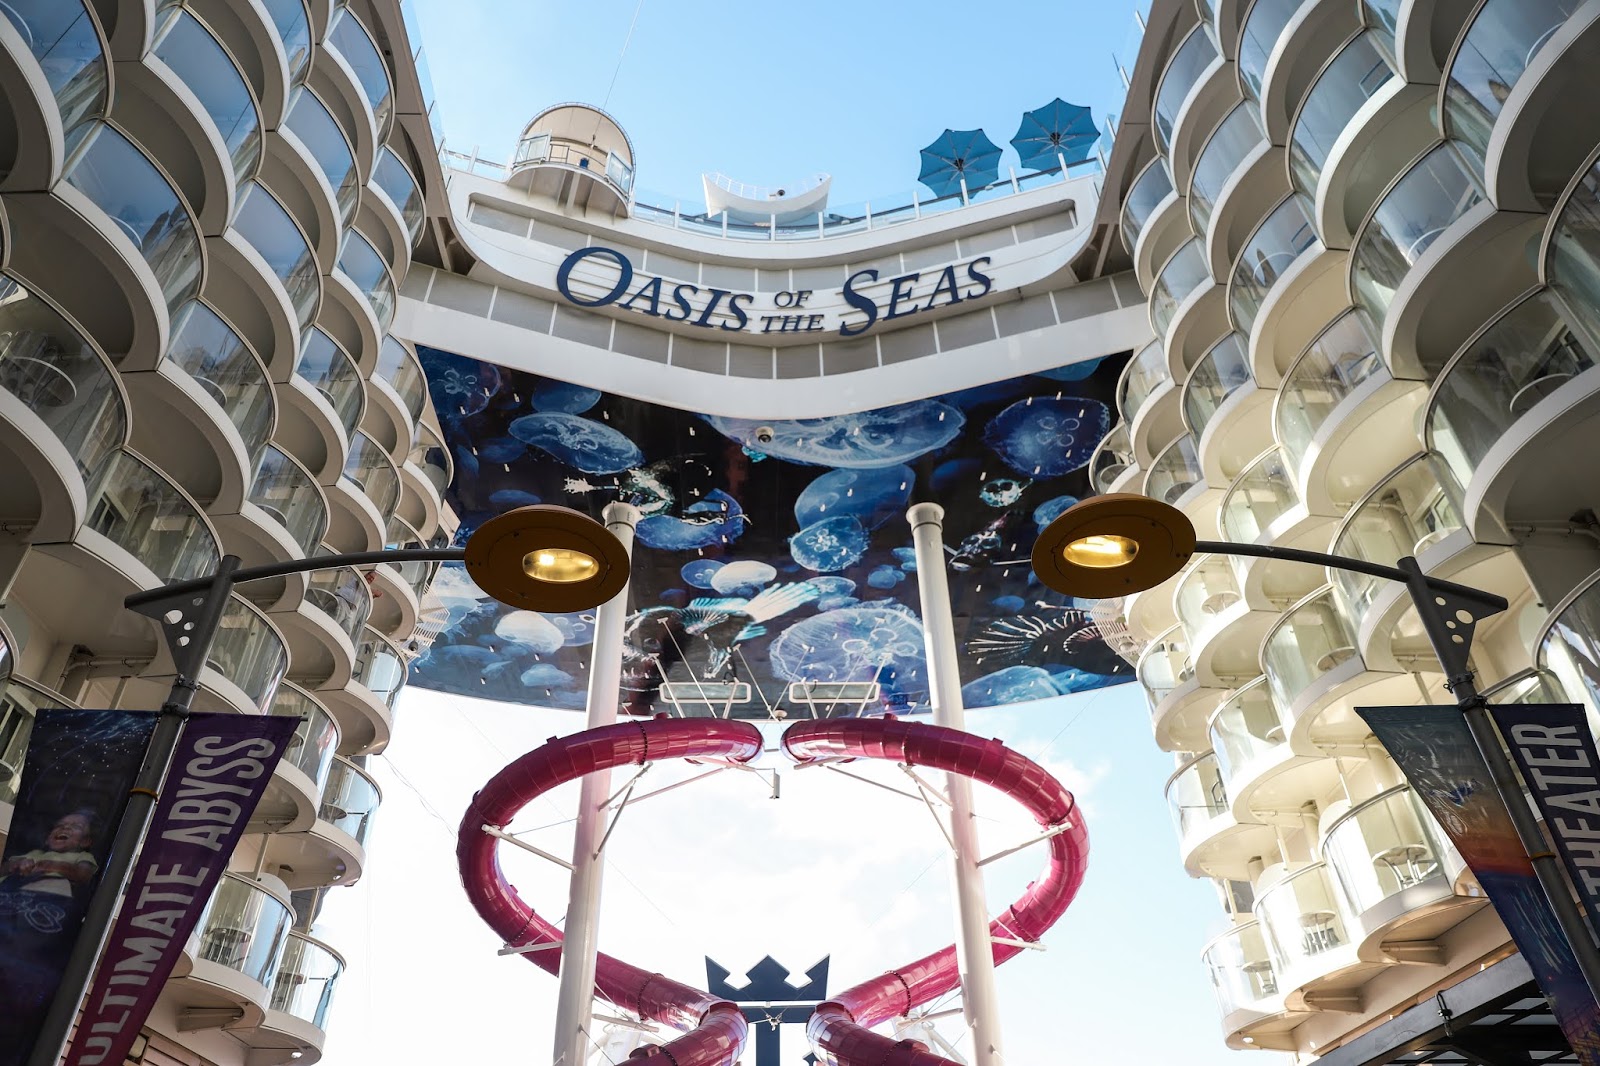 Boardwalk | Oasis of the Seas Couple's Review